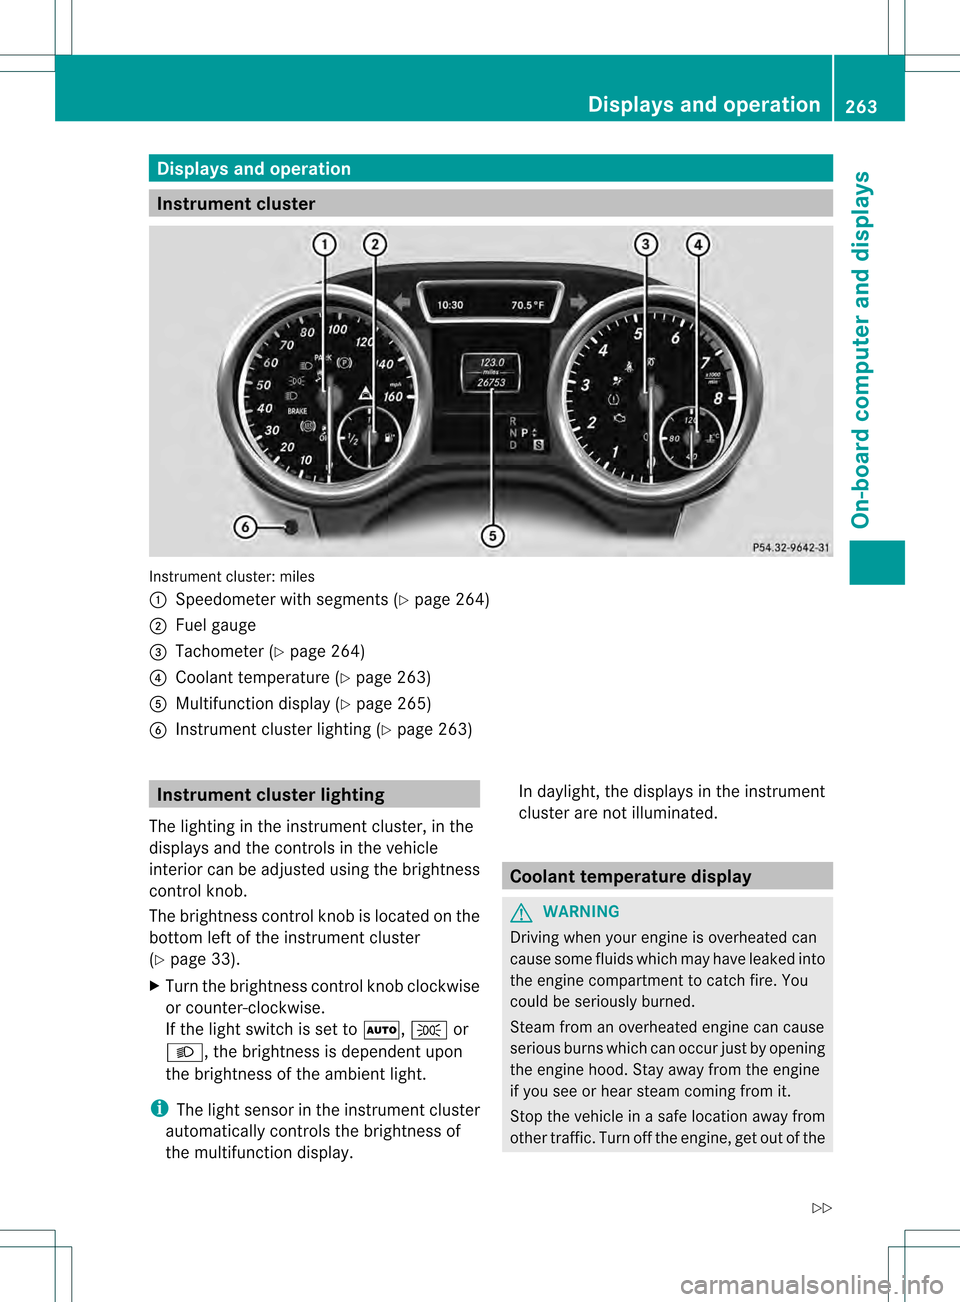 MERCEDES-BENZ M-Class 2013 W166 Owners Manual Displays and operation
Instrument cluster
Instrument cluster: miles
0002
Speedometer with segments (Y page 264)
0003 Fuel gauge
001F Tachometer (Y page 264)
001E Coolant temperature ( Ypage 263)
001C 